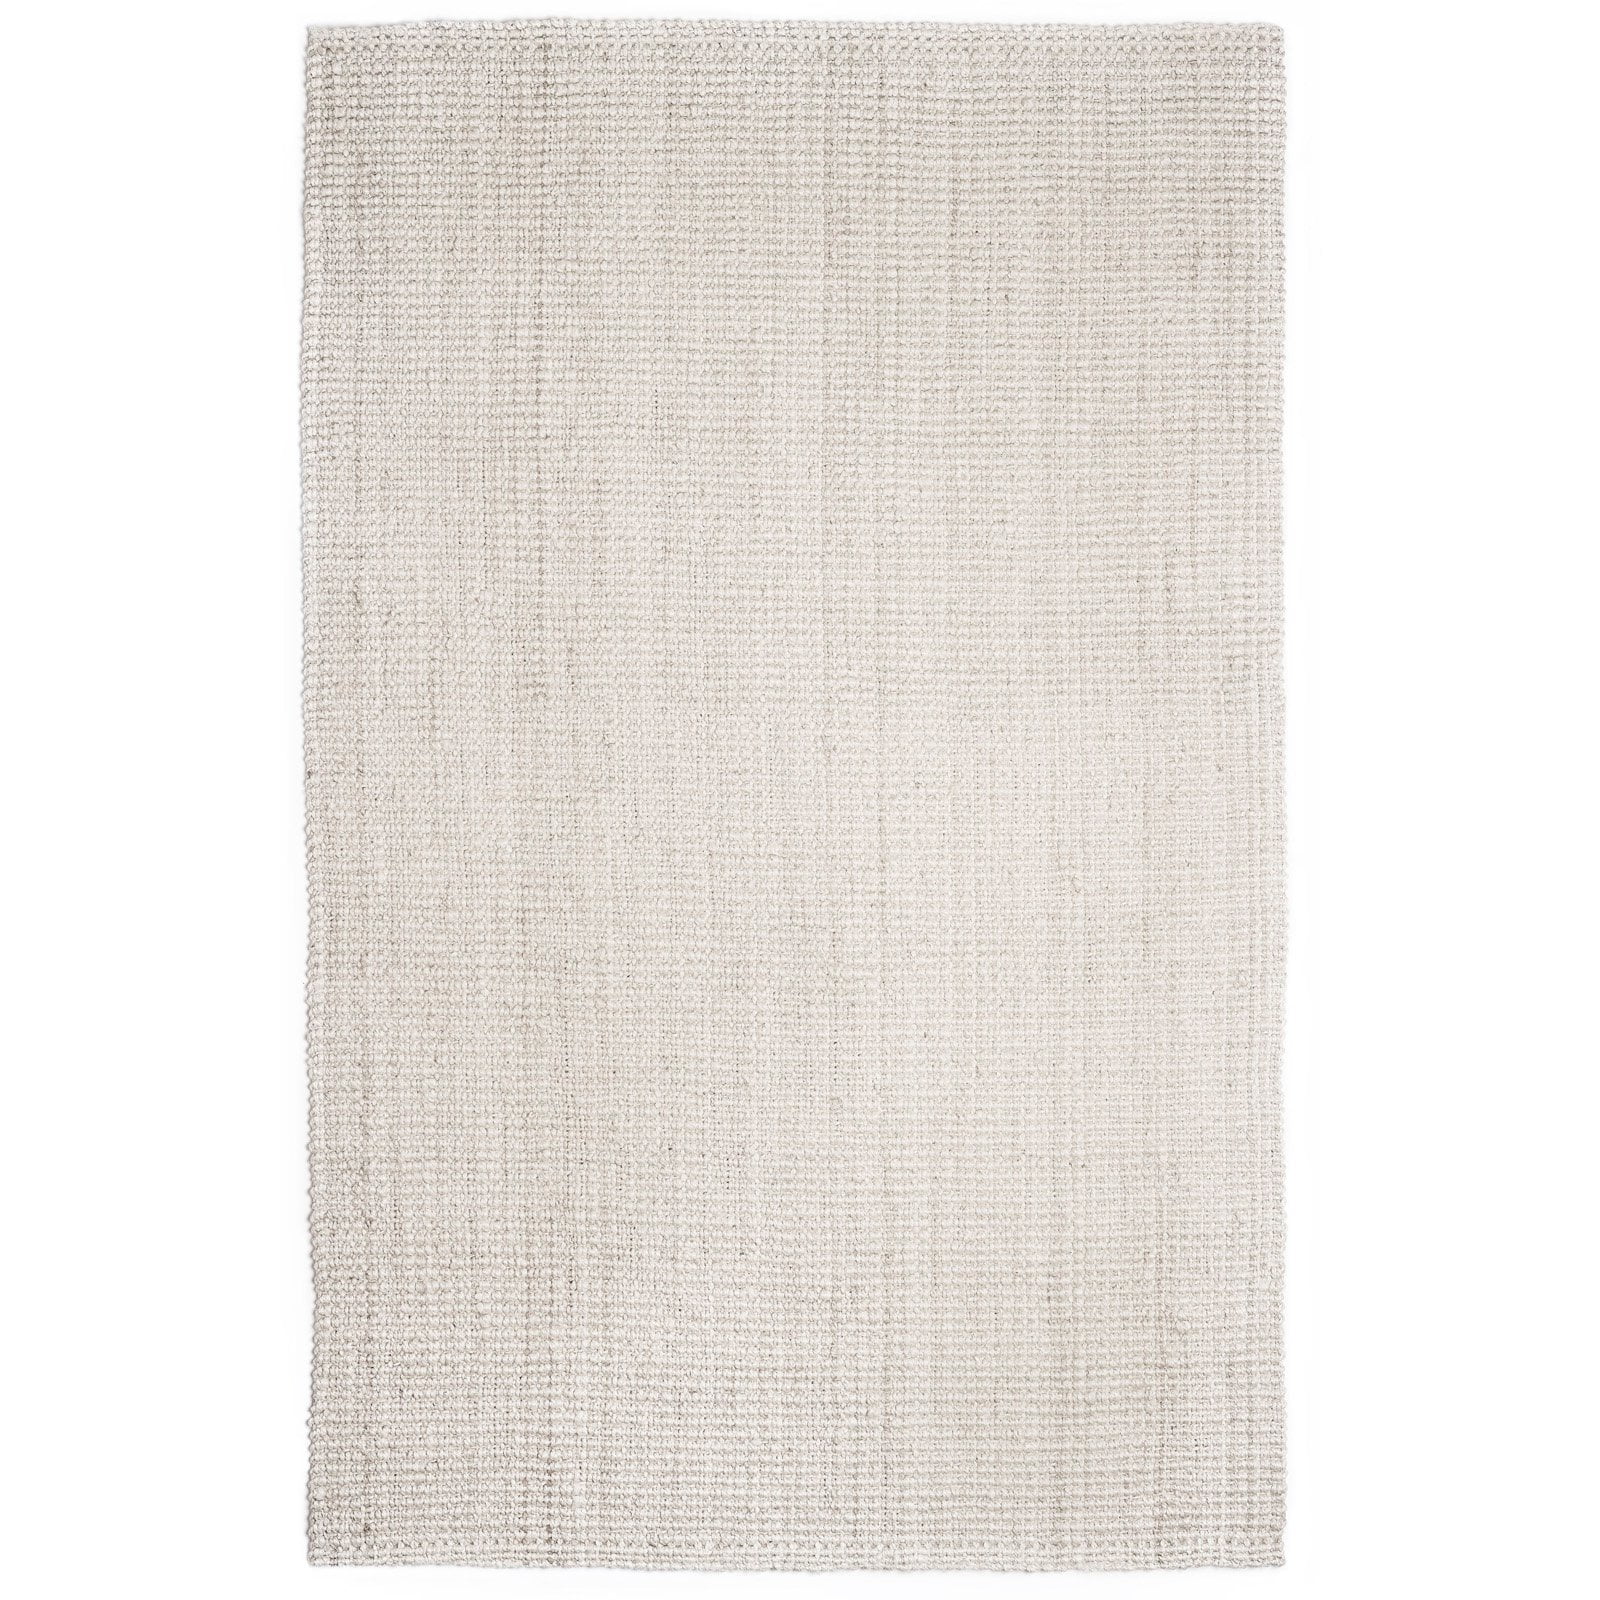 Picture of Anji Mountain AMB0338-0046 4 x 6 ft. Andes Jute Rectangular Rug - Ivory, Creme